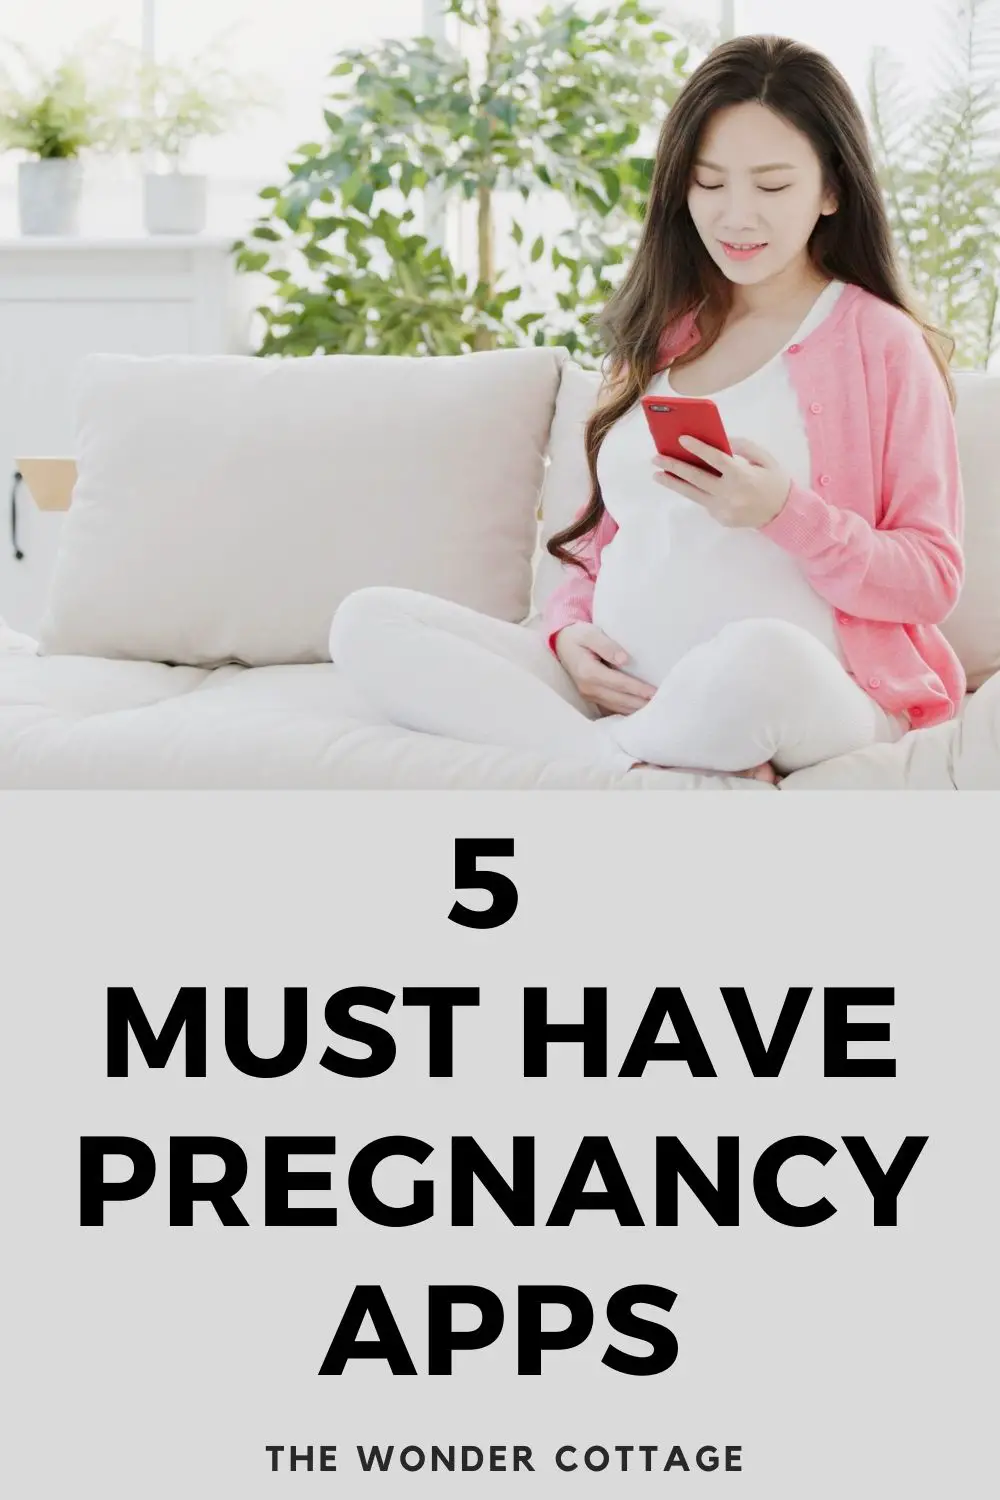 5 must have pregnancy apps